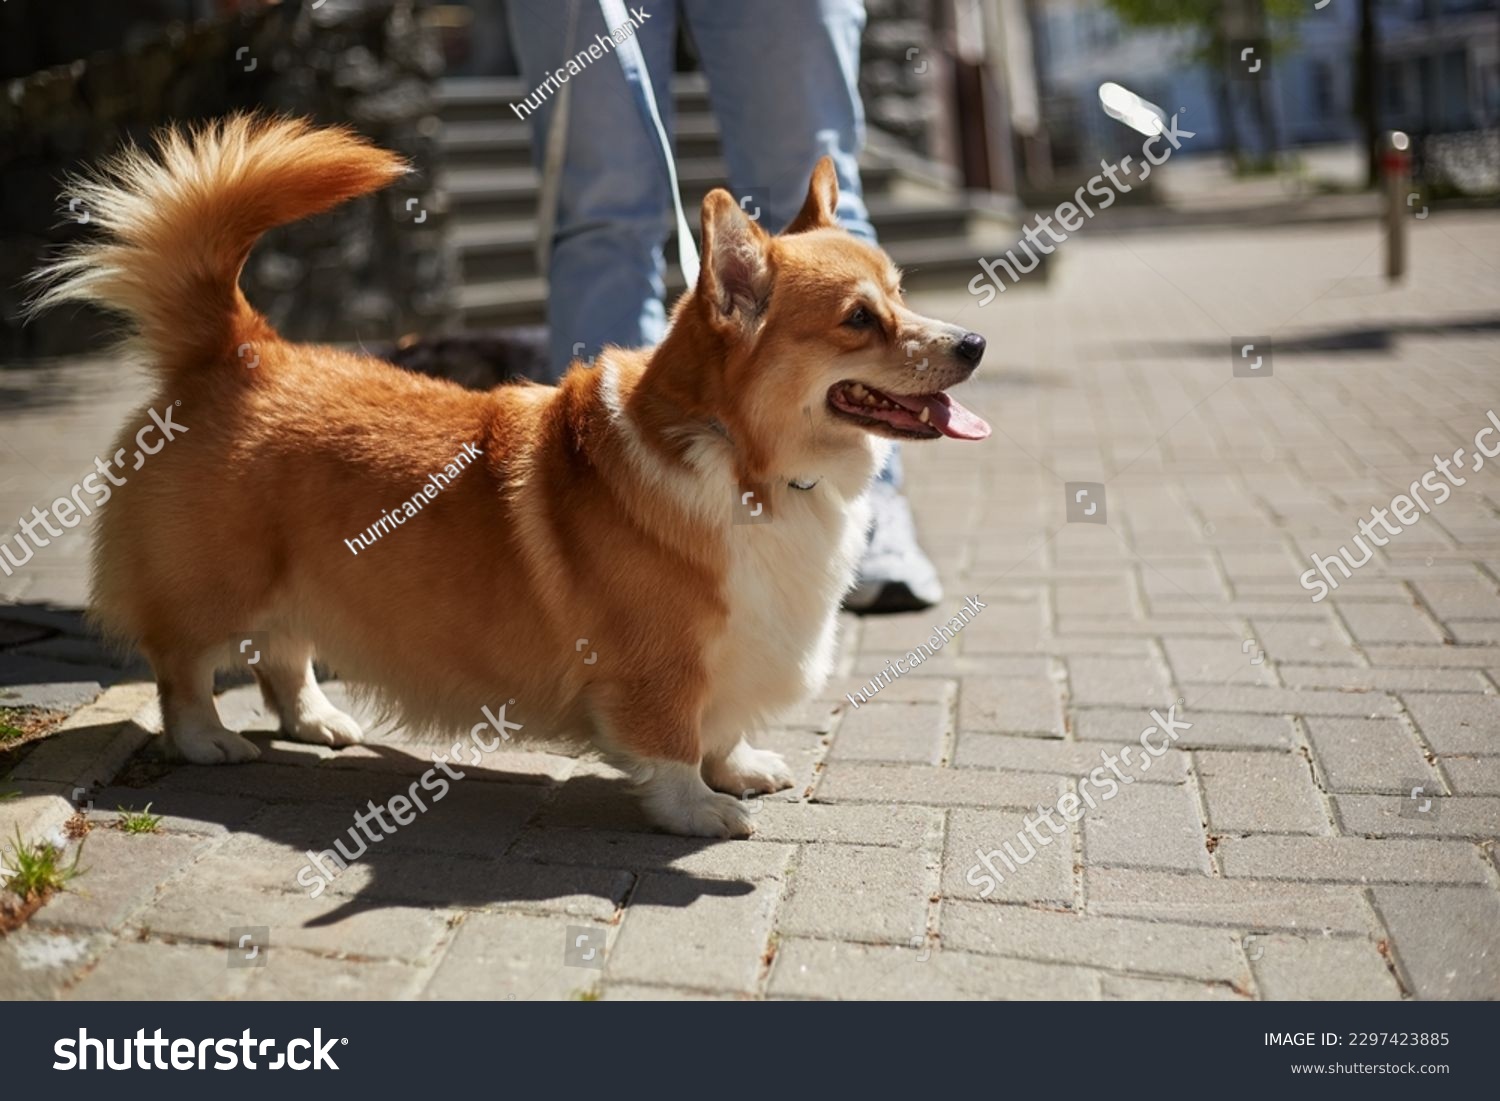 Cute brown corgi dog walking on a leash in the city. Adorable young Pembroke Welsh Corgi with the owner #2297423885